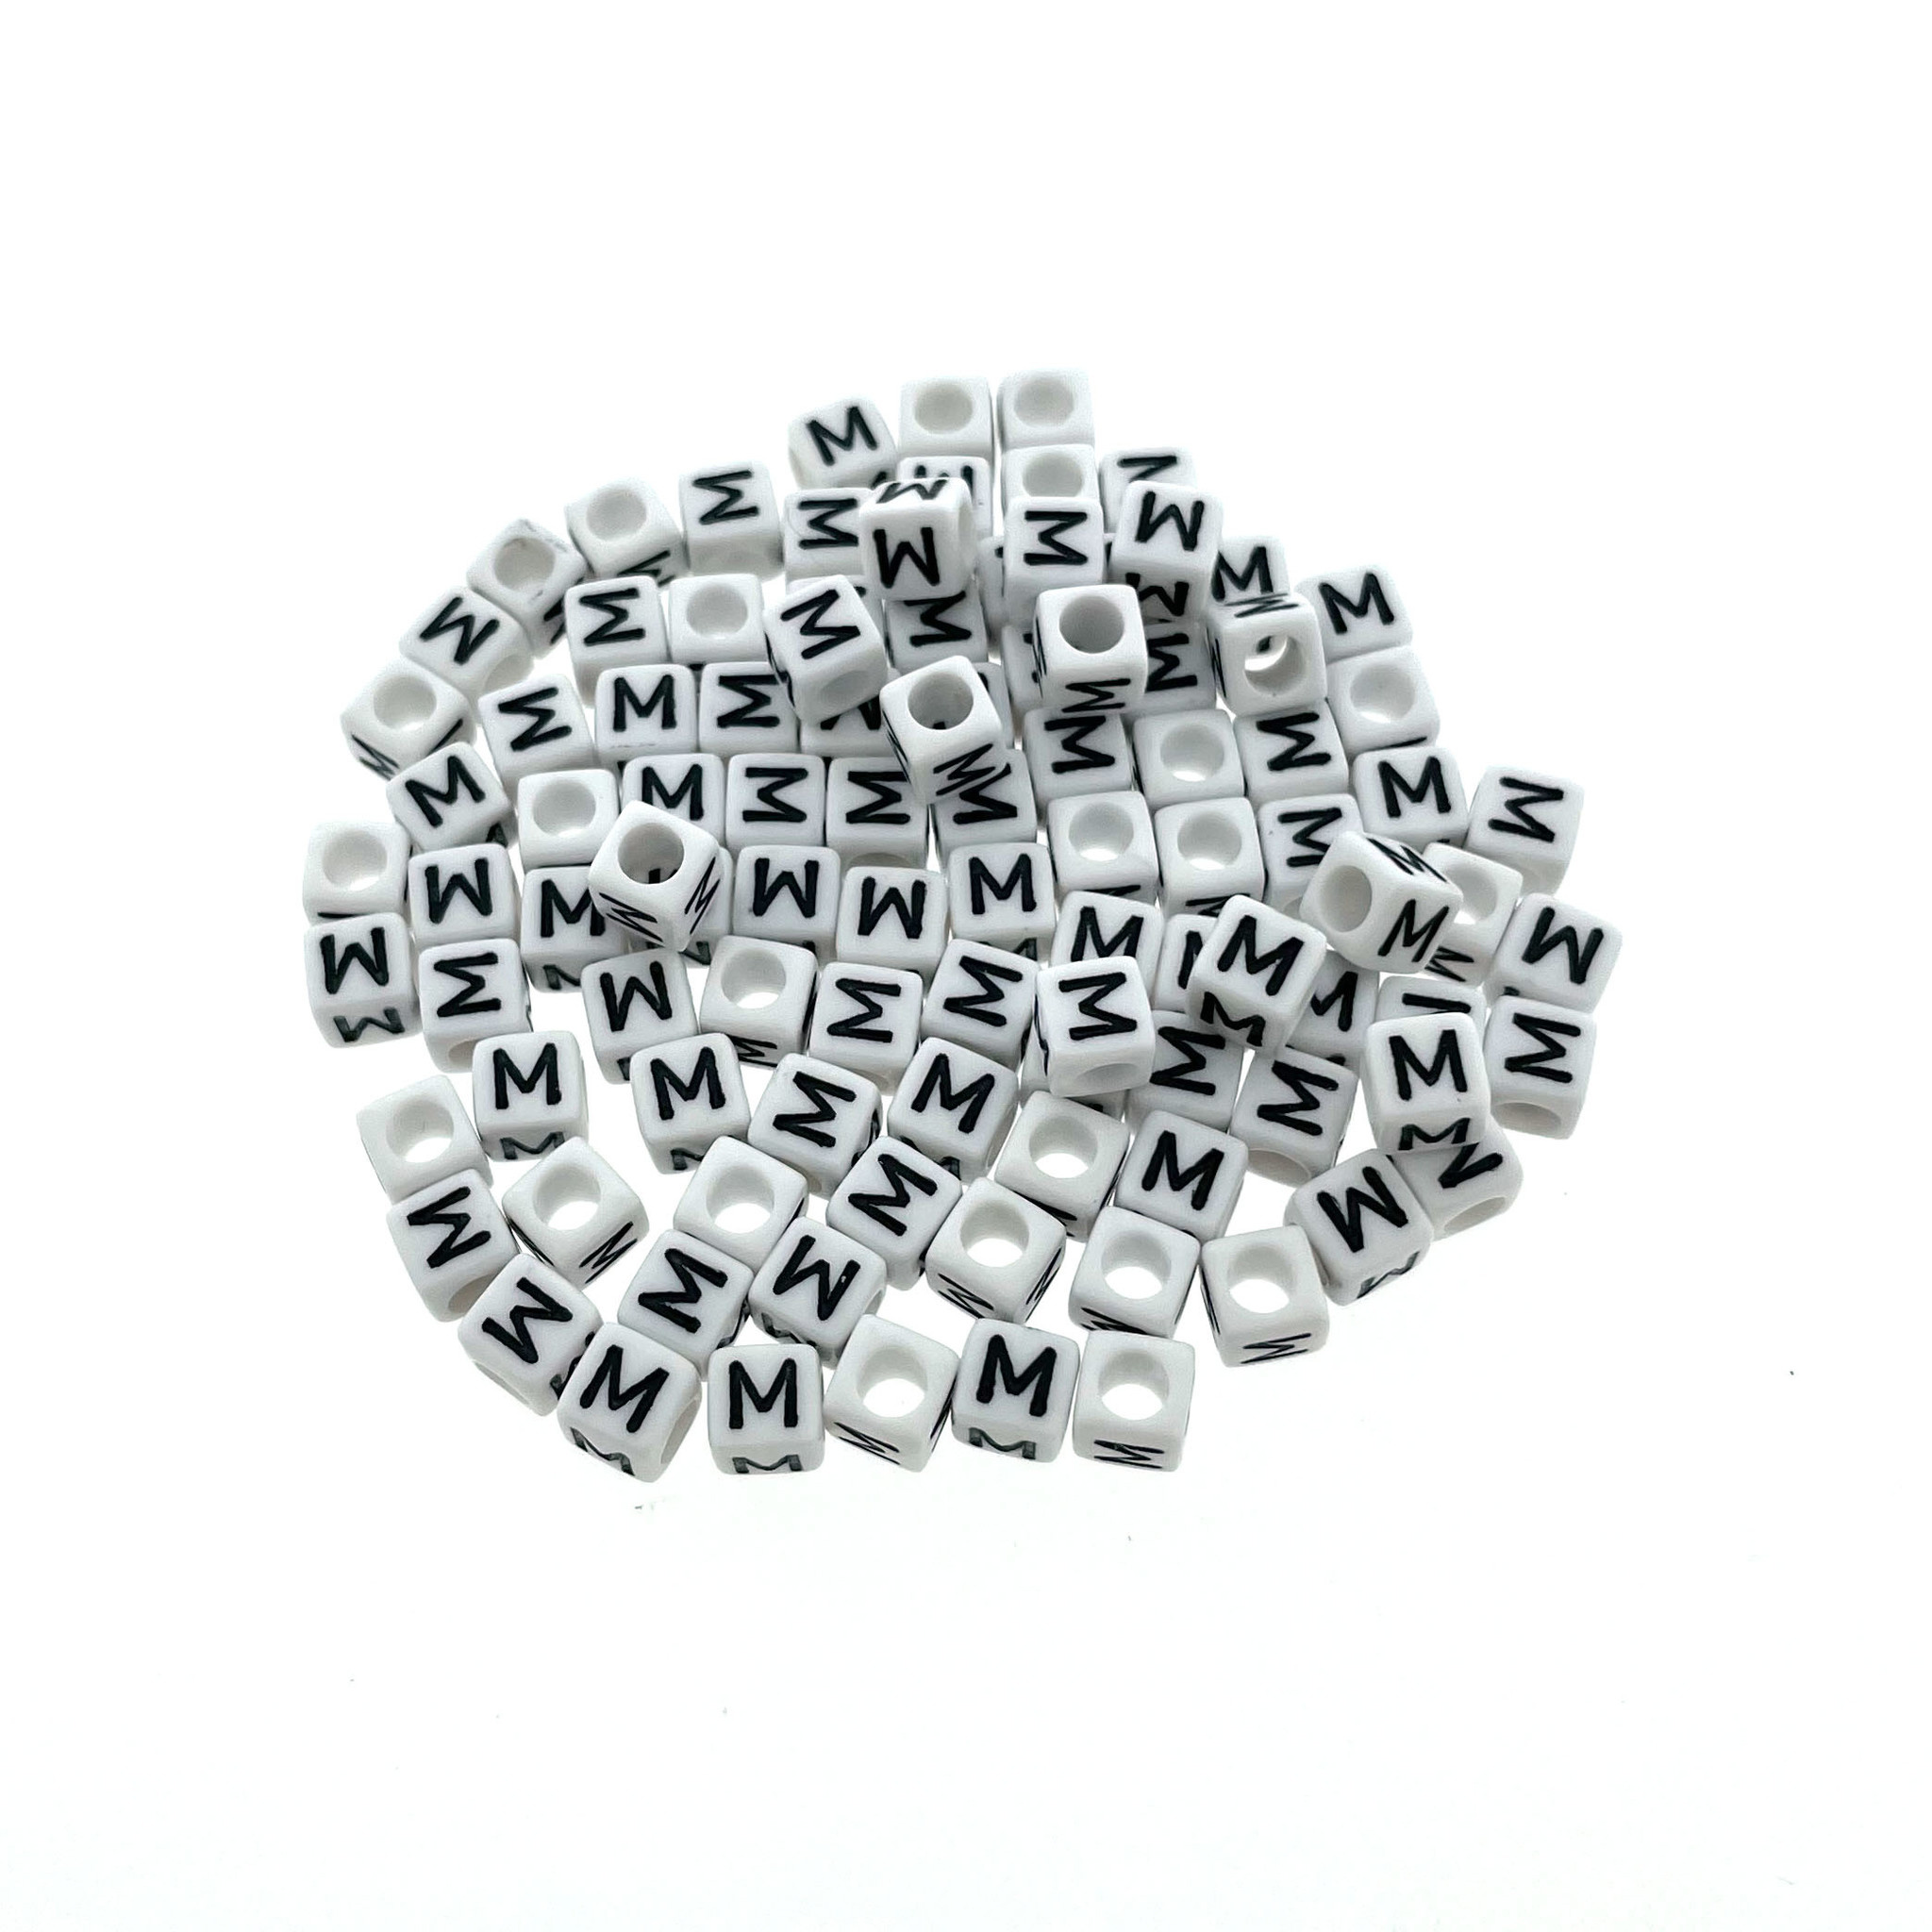 Buy Paracord alphabet letter beads White M at 123Paracord - 123Paracord